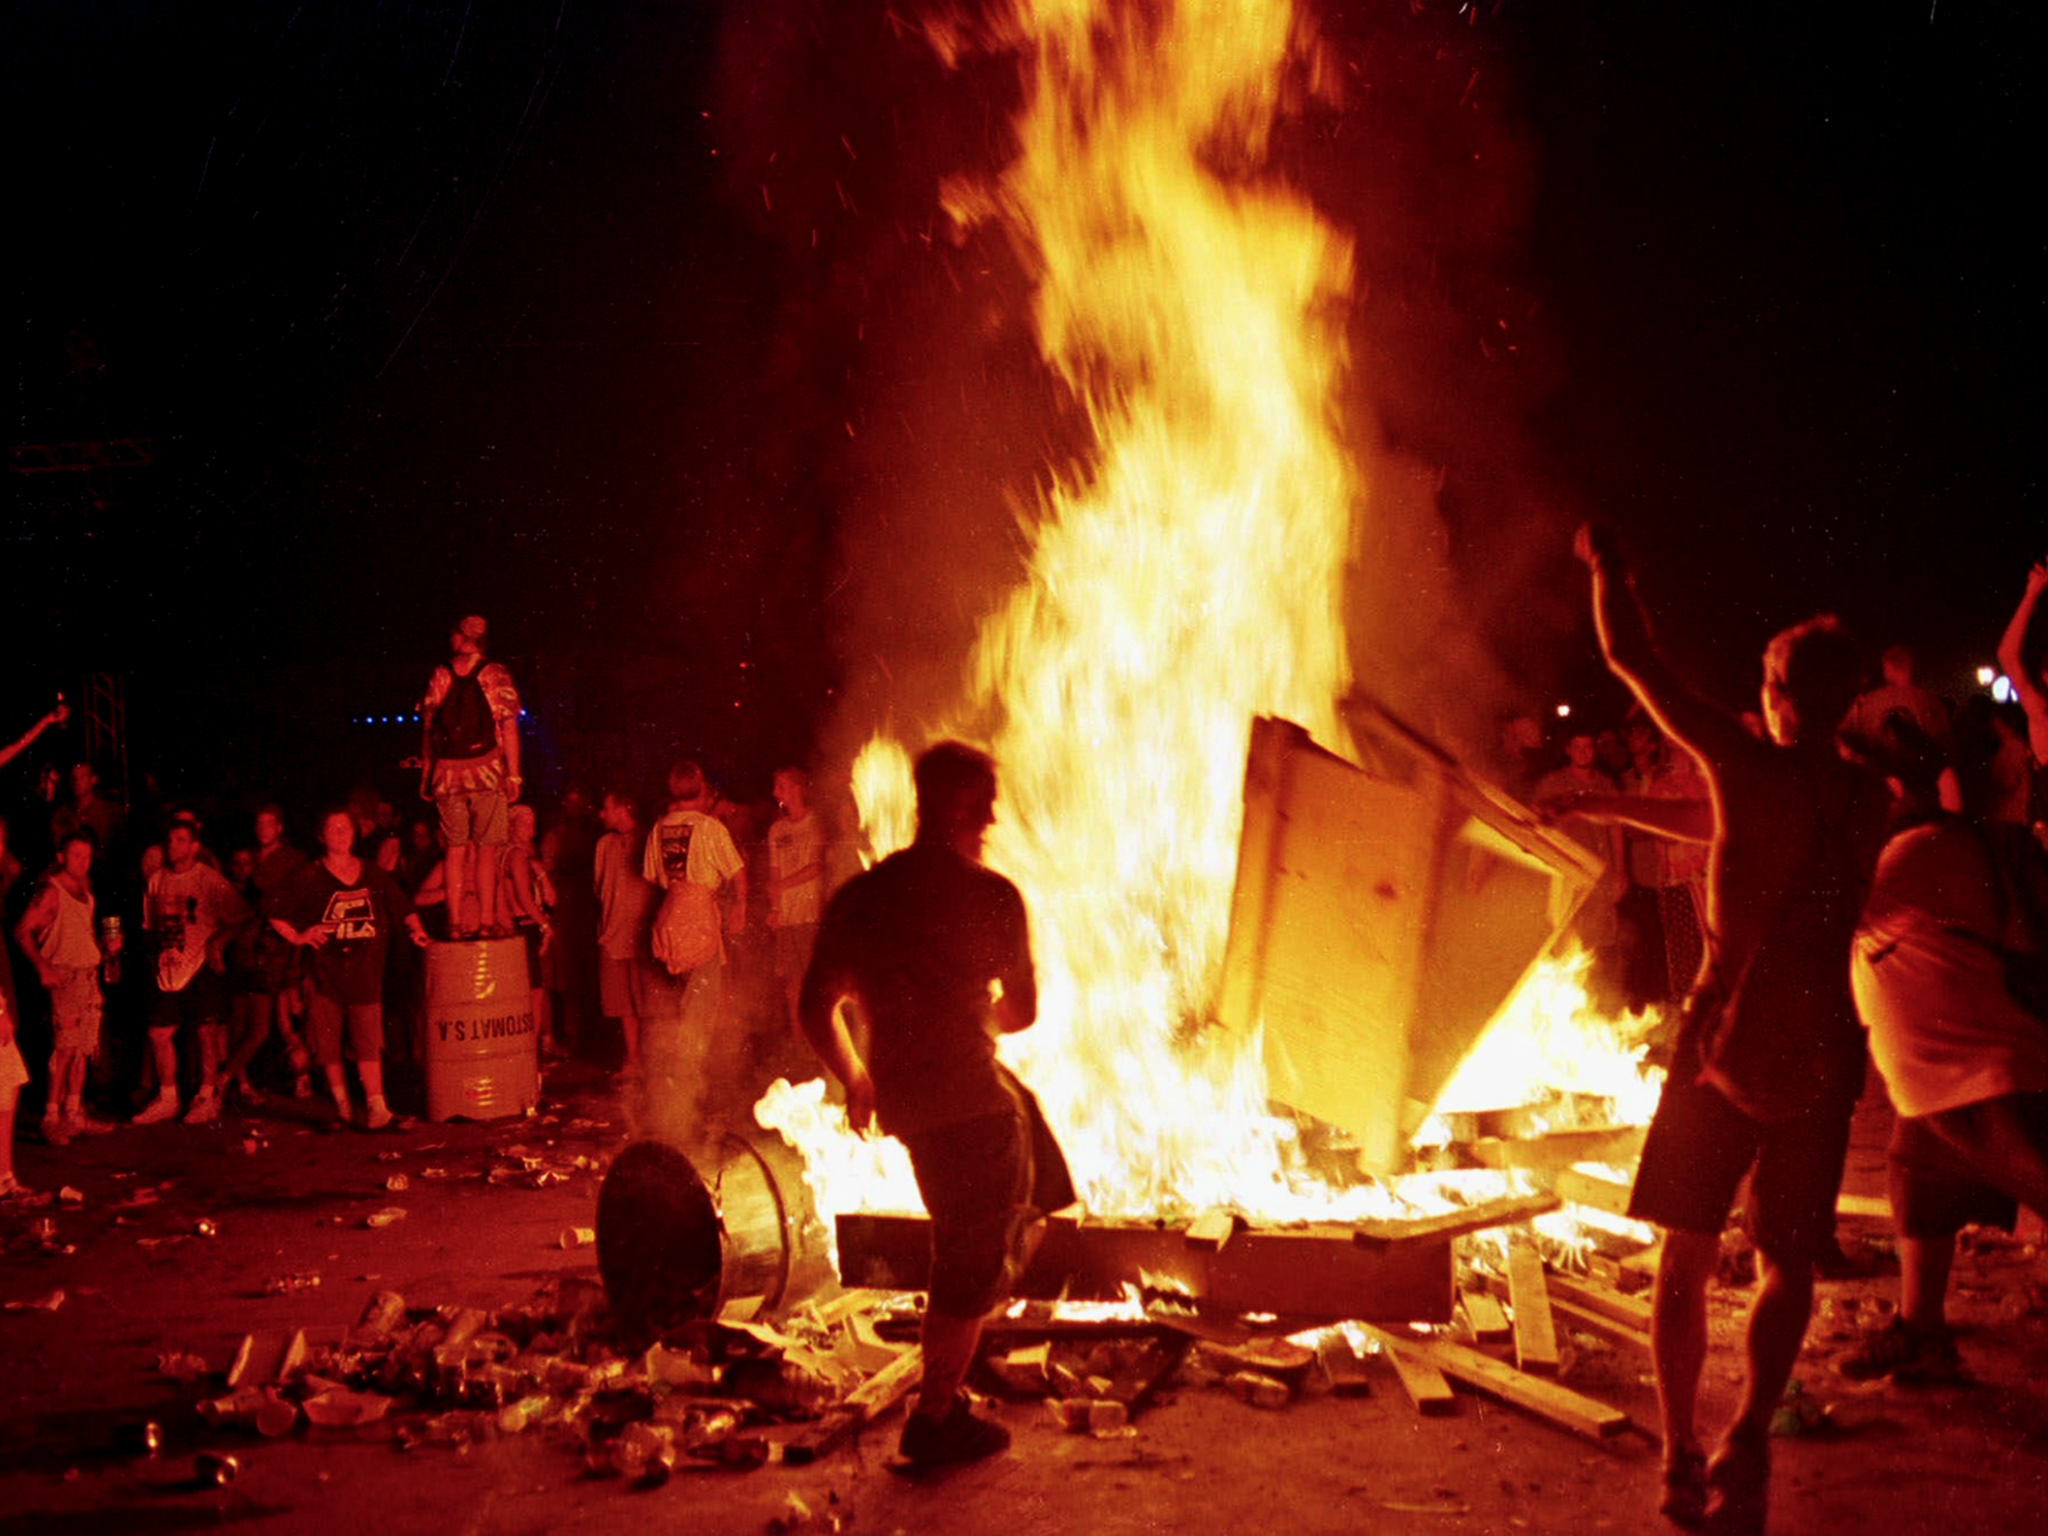 Woodstock 99 The disturbing true story behind the disastrous music festival The Independent